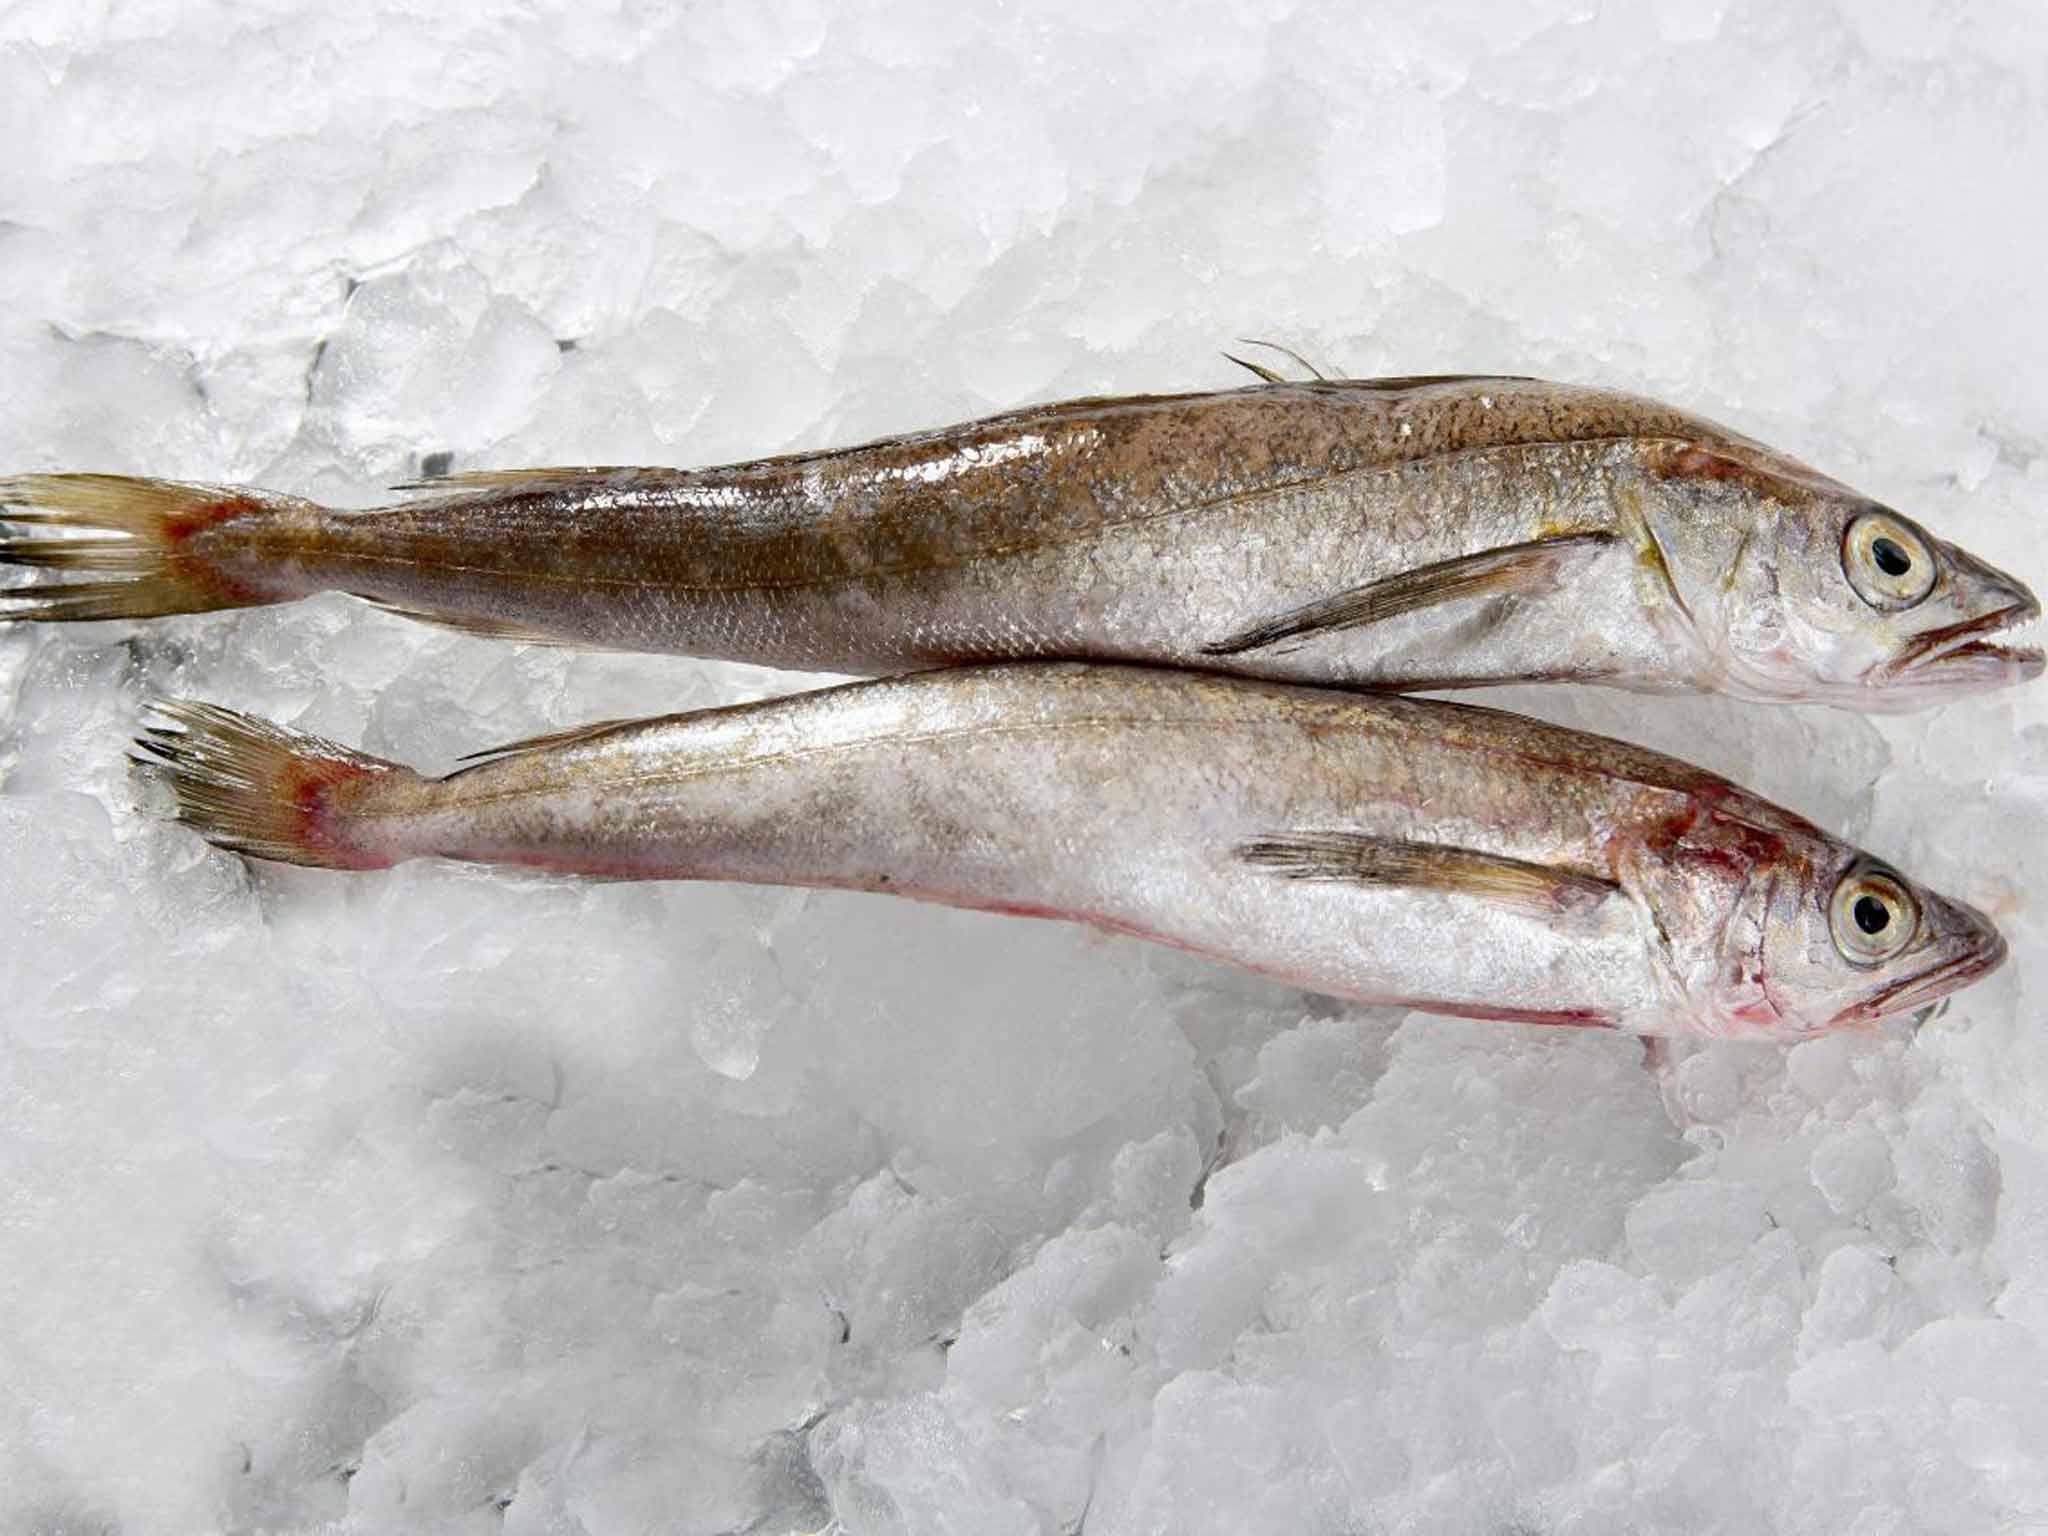 Chefs are using all parts of the fish to make delicious dishes